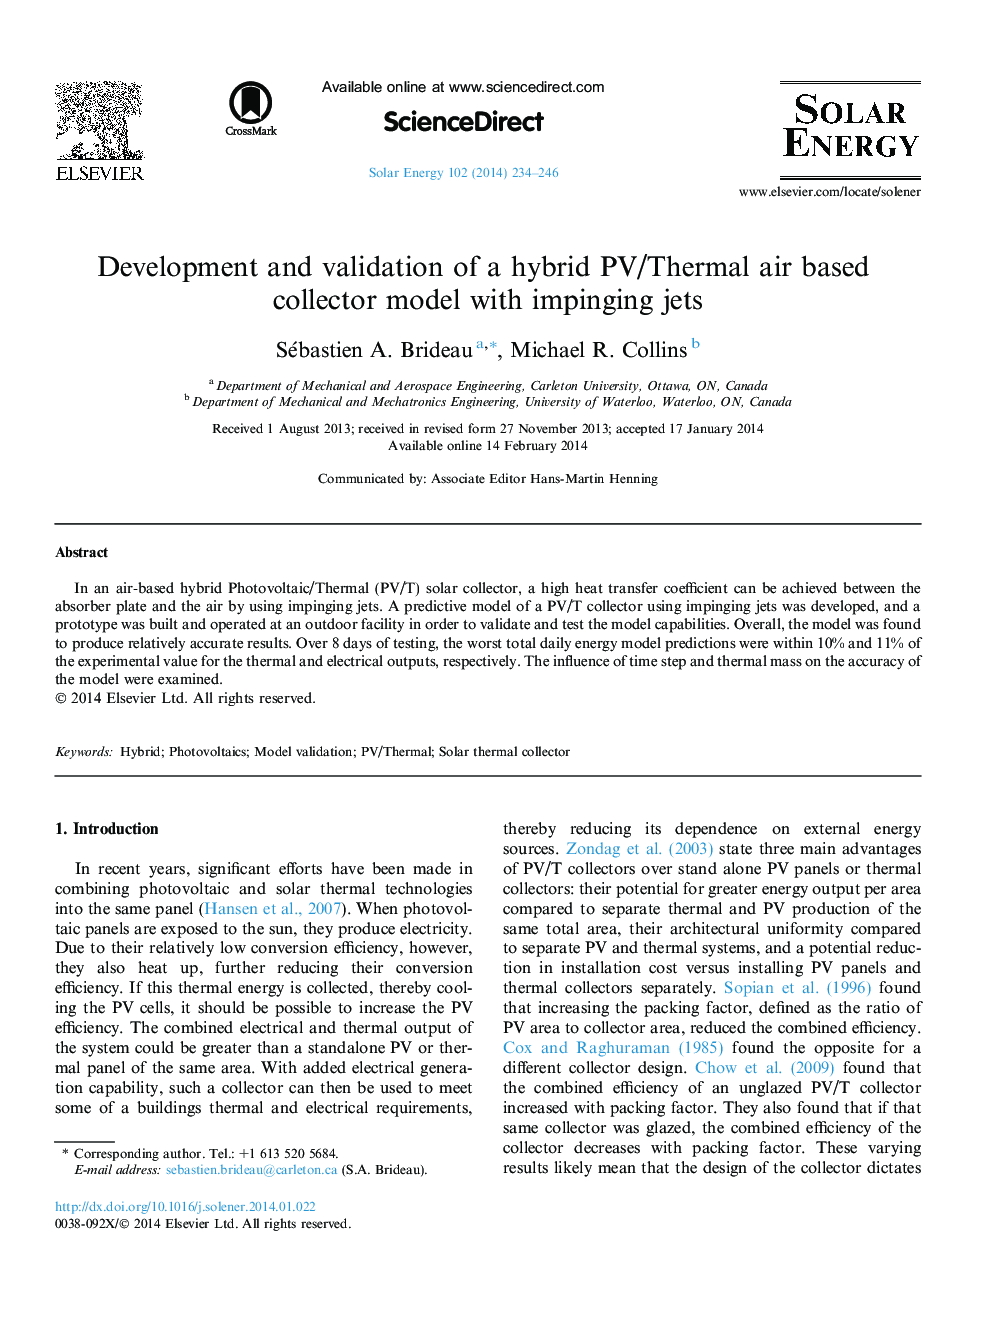 Development and validation of a hybrid PV/Thermal air based collector model with impinging jets